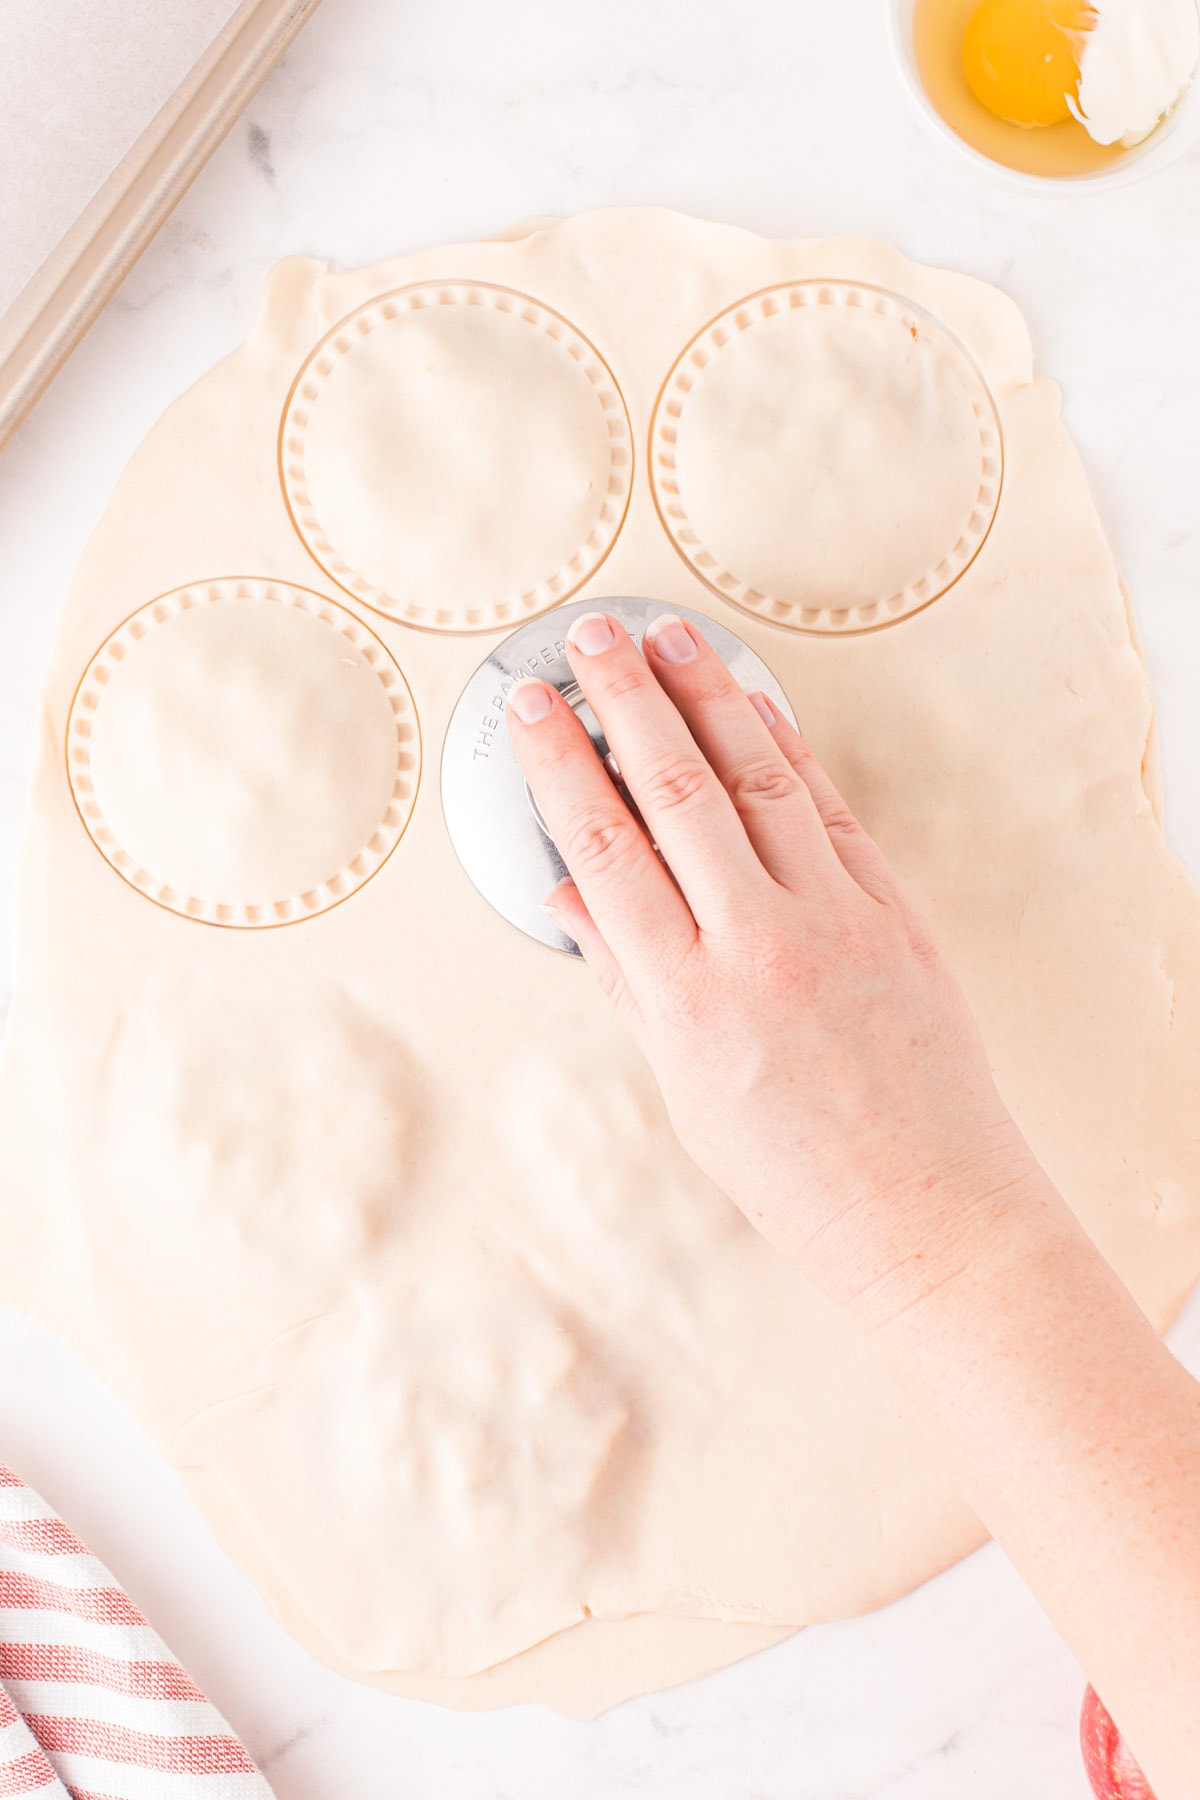 Cut and seal each hand pie with a sandwich sealer